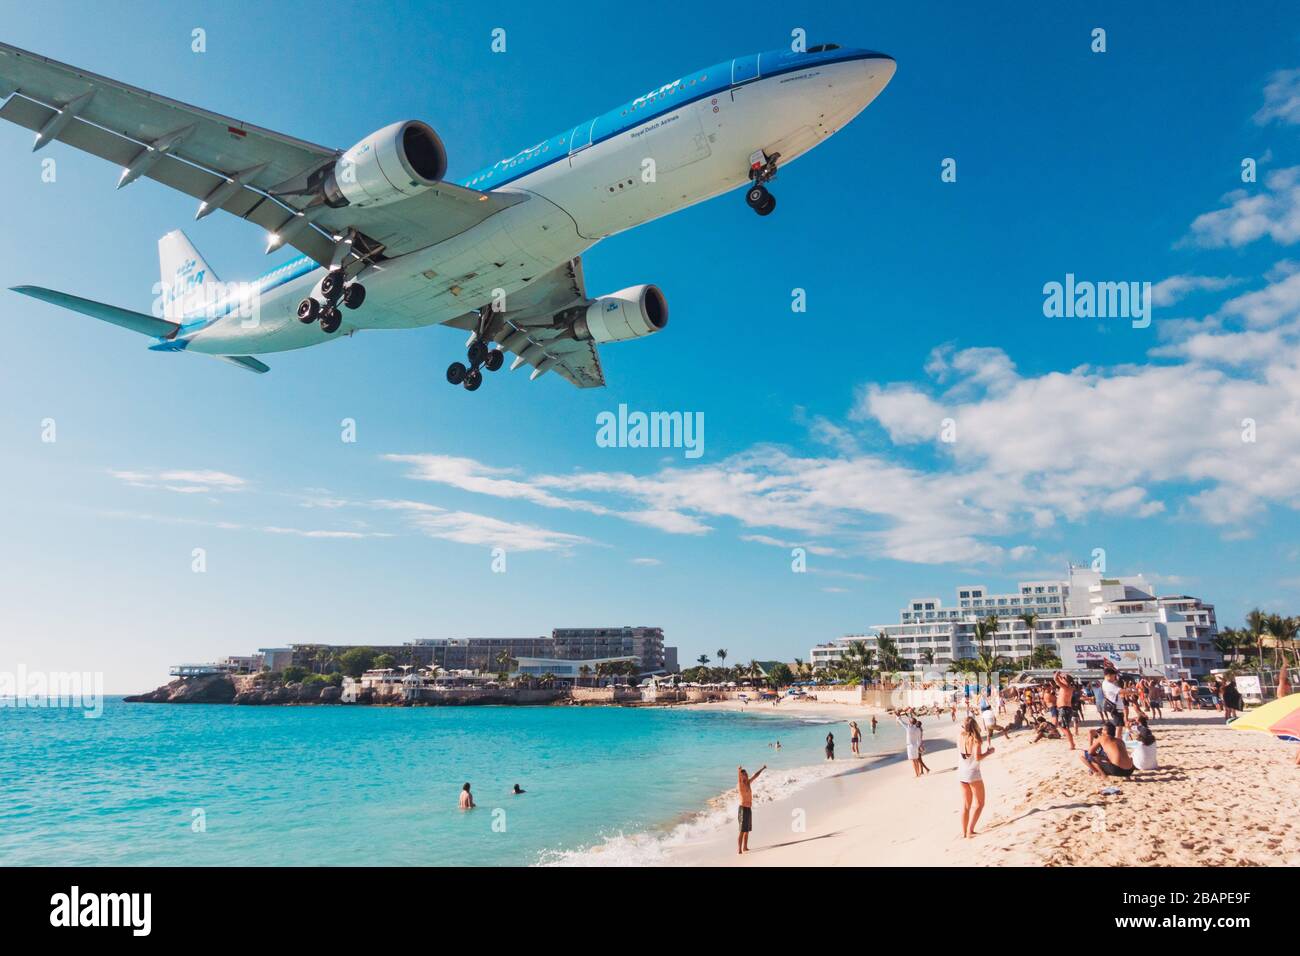 An Airbus A330-200 series operated by KLM Royal Dutch Airlines flies over tourists on Maho Beach, St. Maarten, on approach to Princess Juliana Airport Stock Photo